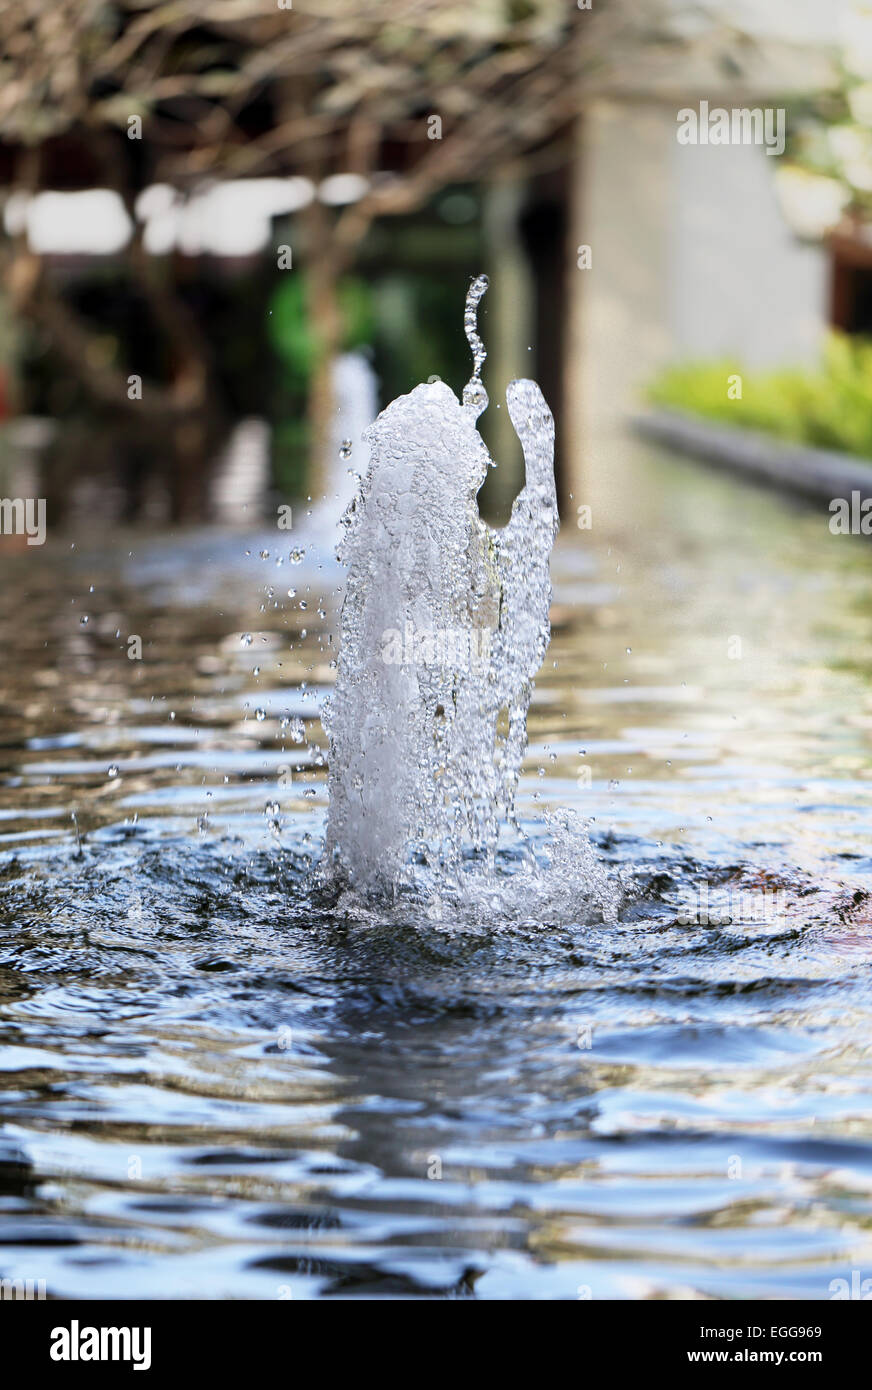 small fountain water jet photographed close up Stock Photo